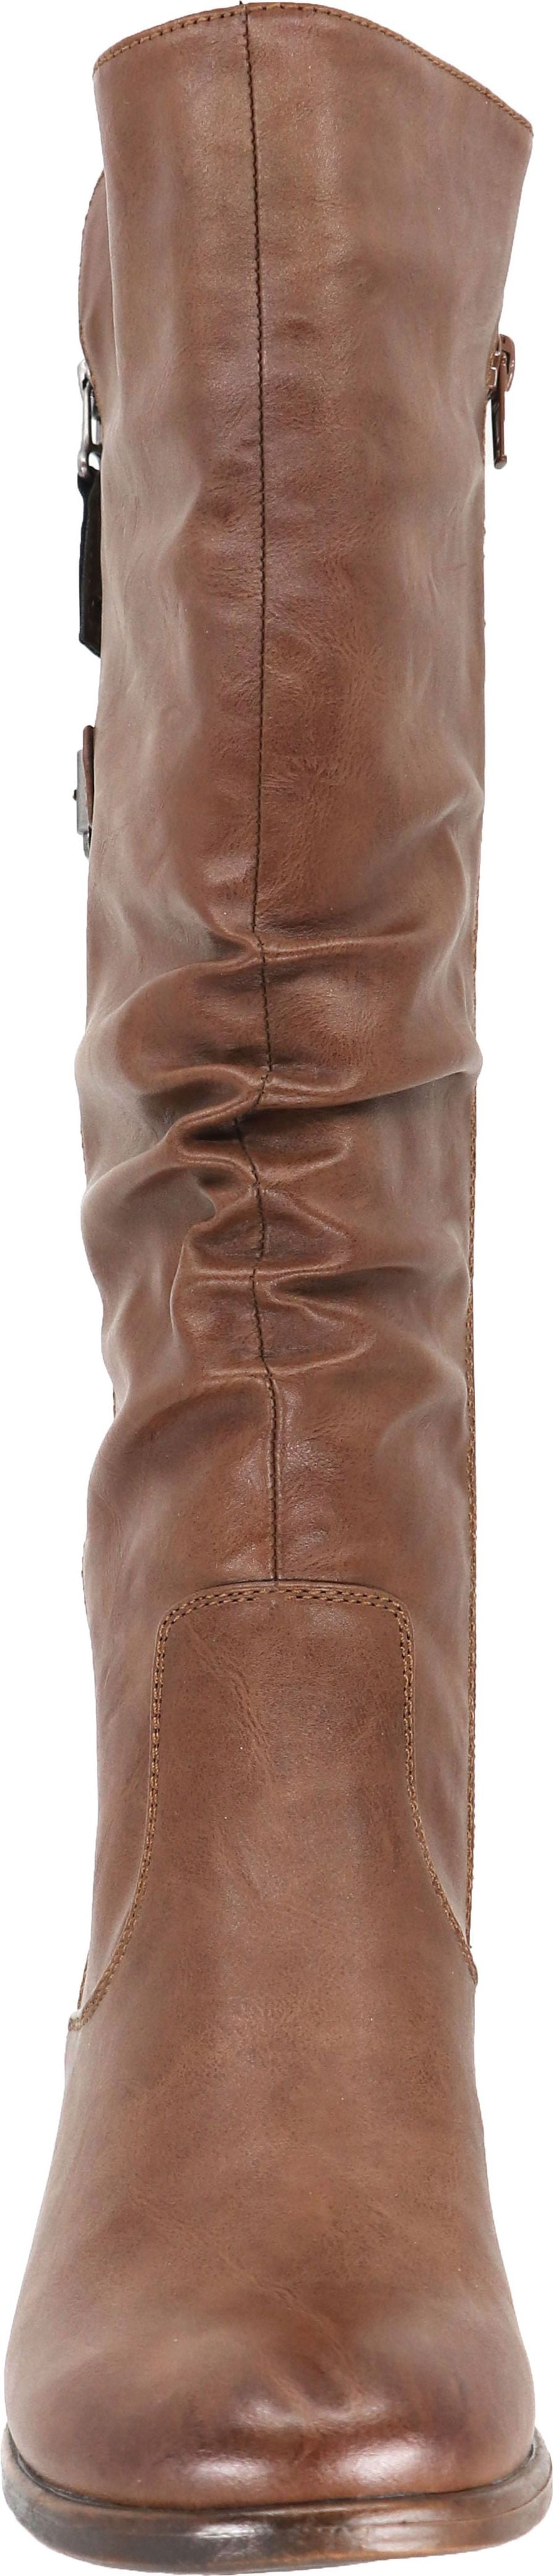 Taxi Boots Chicago Waterproof Tan